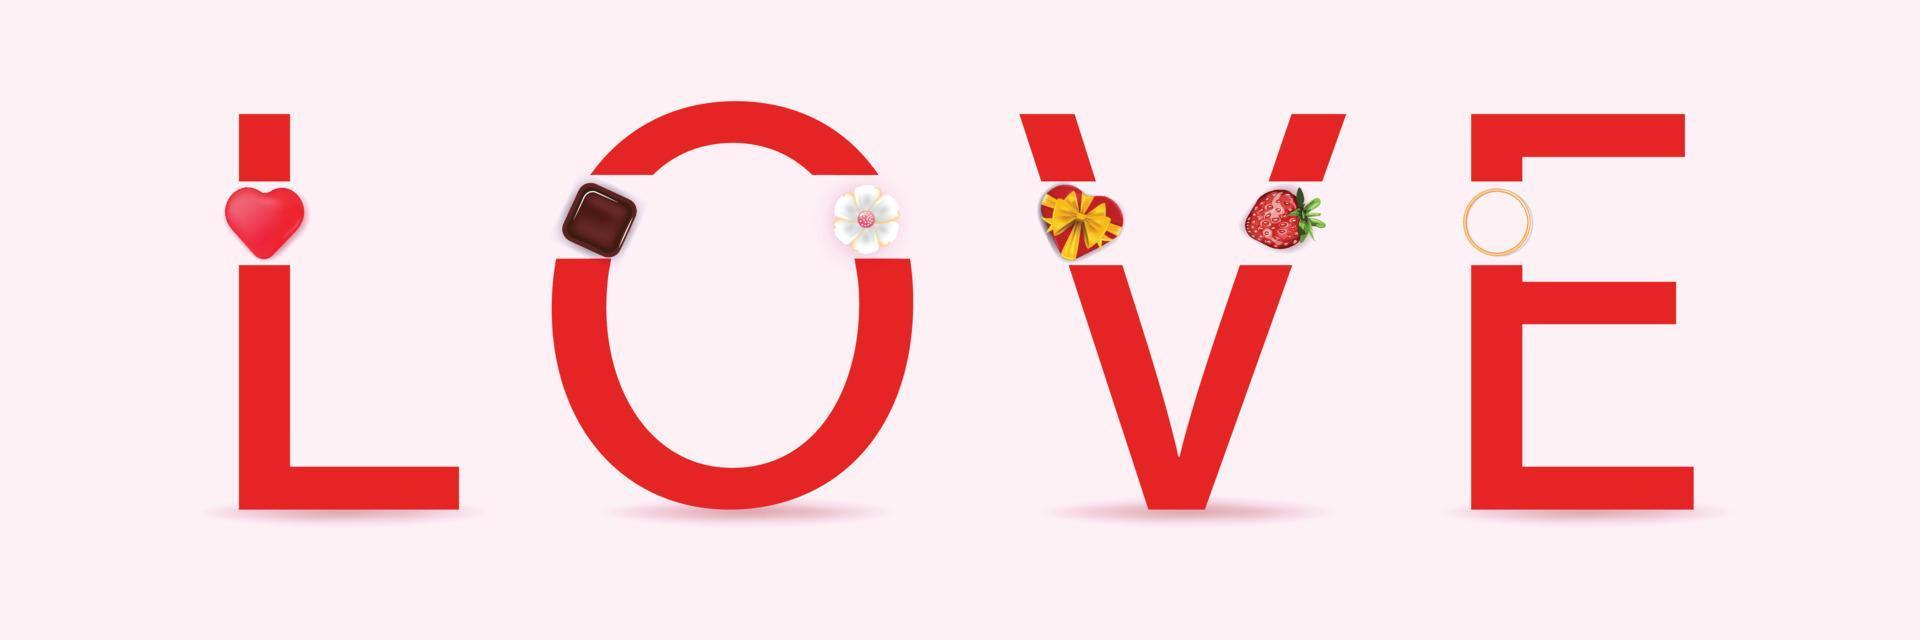 Banner with Valentine's Day elements and the word Love. Template for banners, cards, advertisements, invitations, backgrounds. Vector illustration.